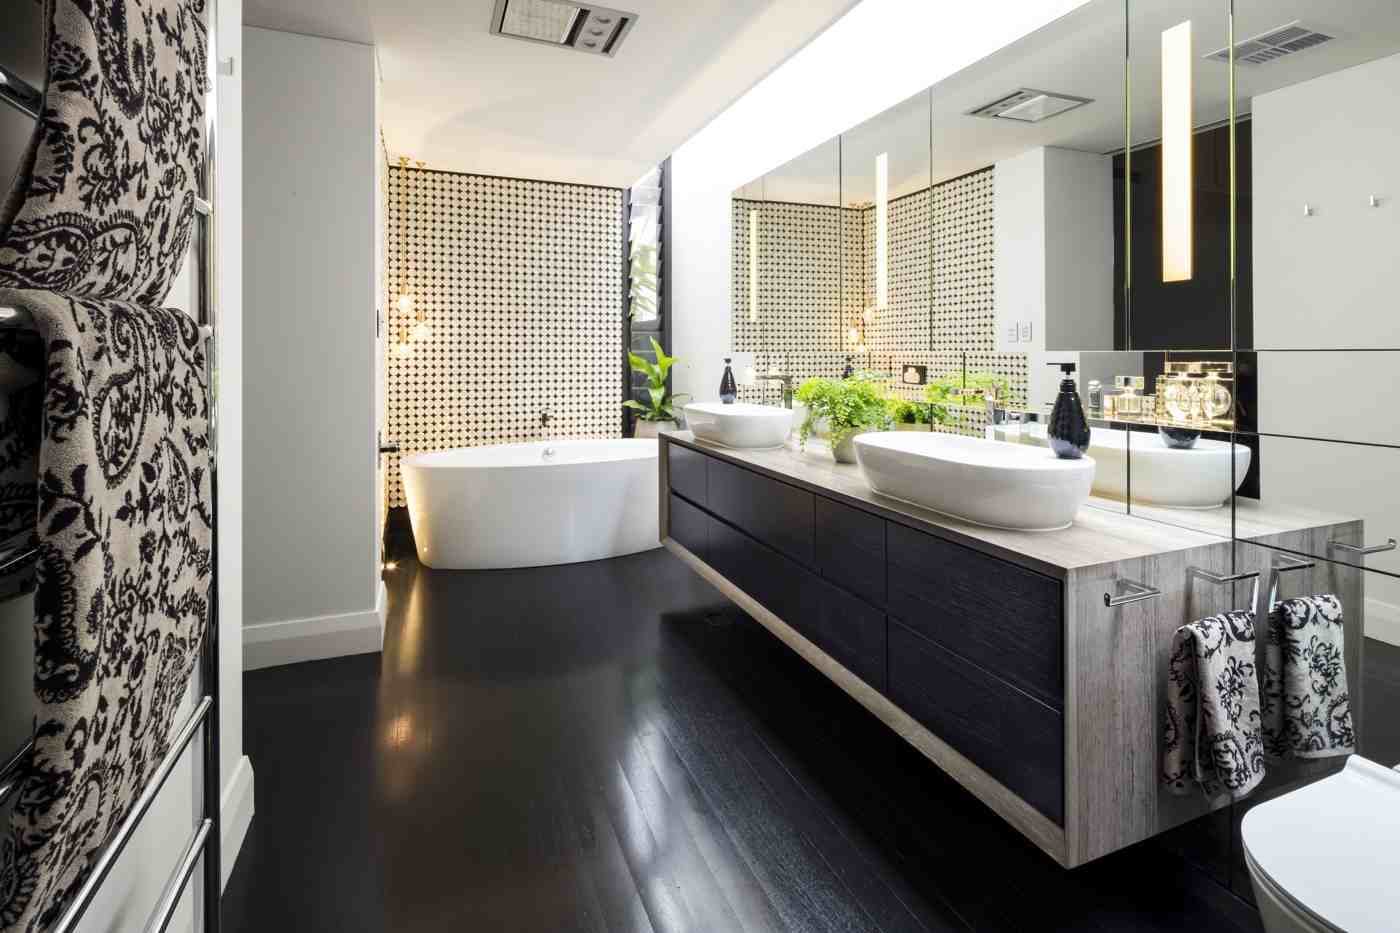 modern bathrooms without tile wall design with color and wallpaper a freestanding bathtub made of ceramics and wooden floors